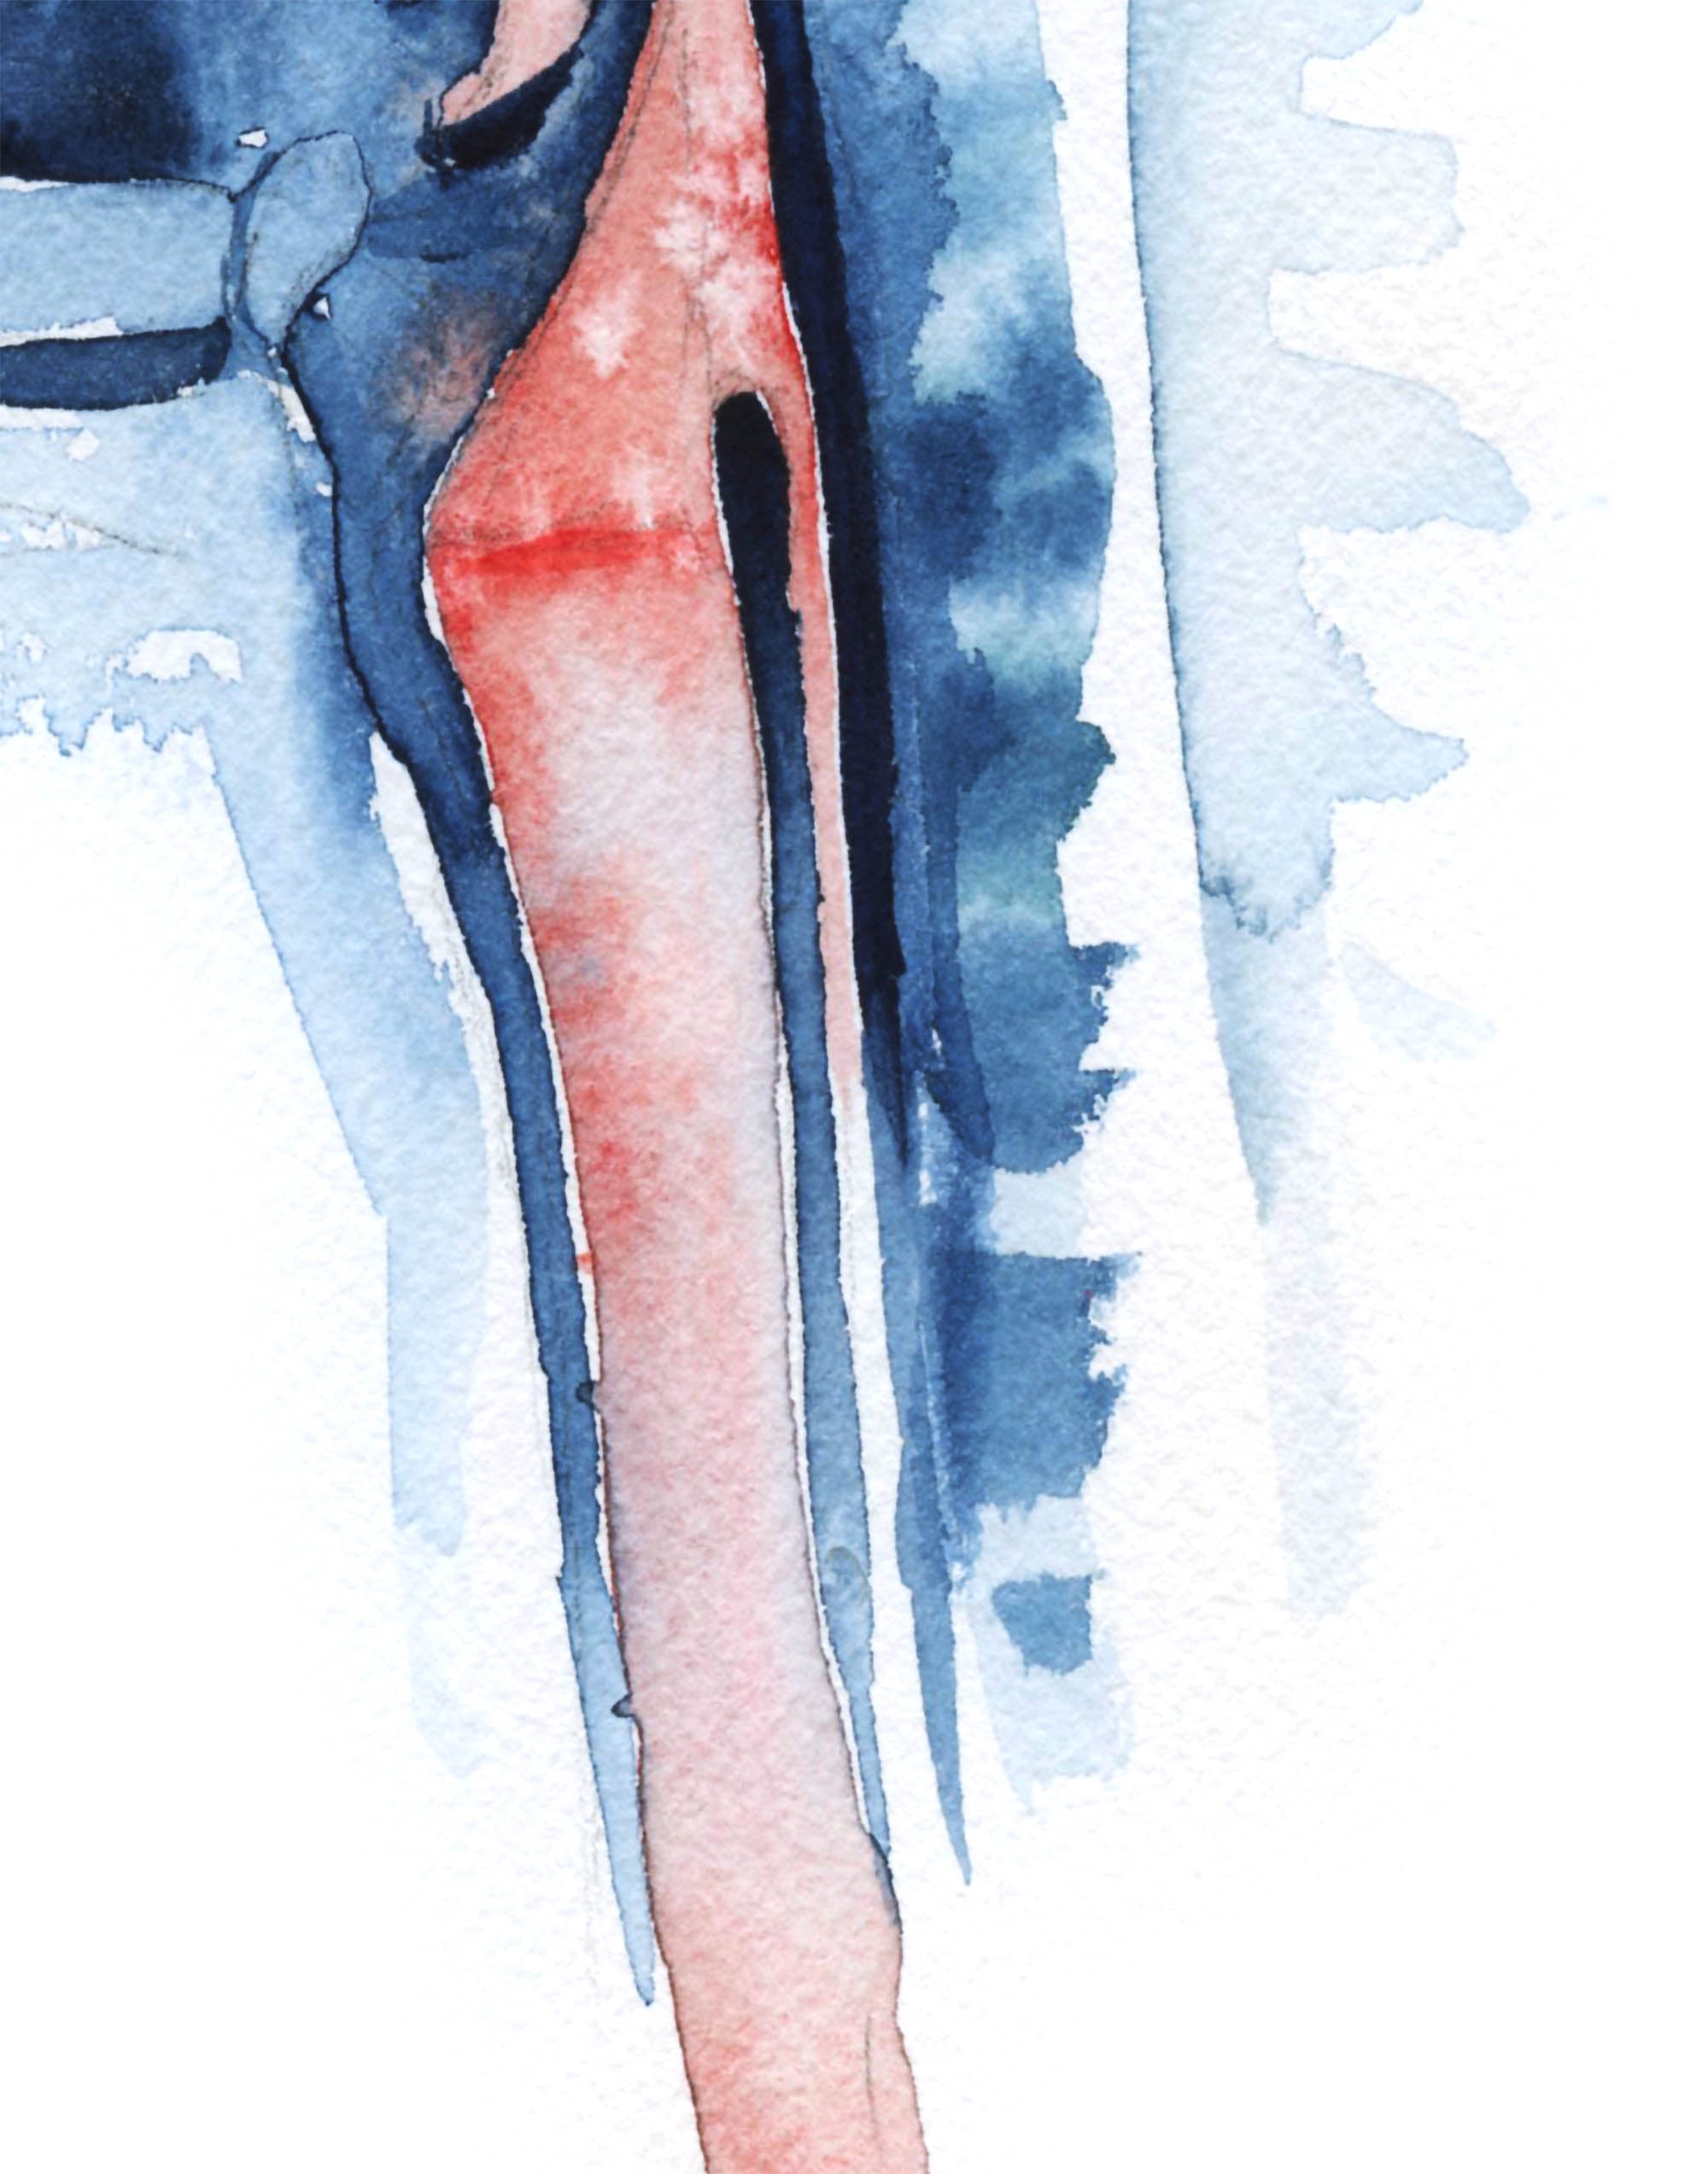 Zoomed in view of a watercolor painting showing a swallowing mechanism with mouth, throat and tongue in prints and blues.